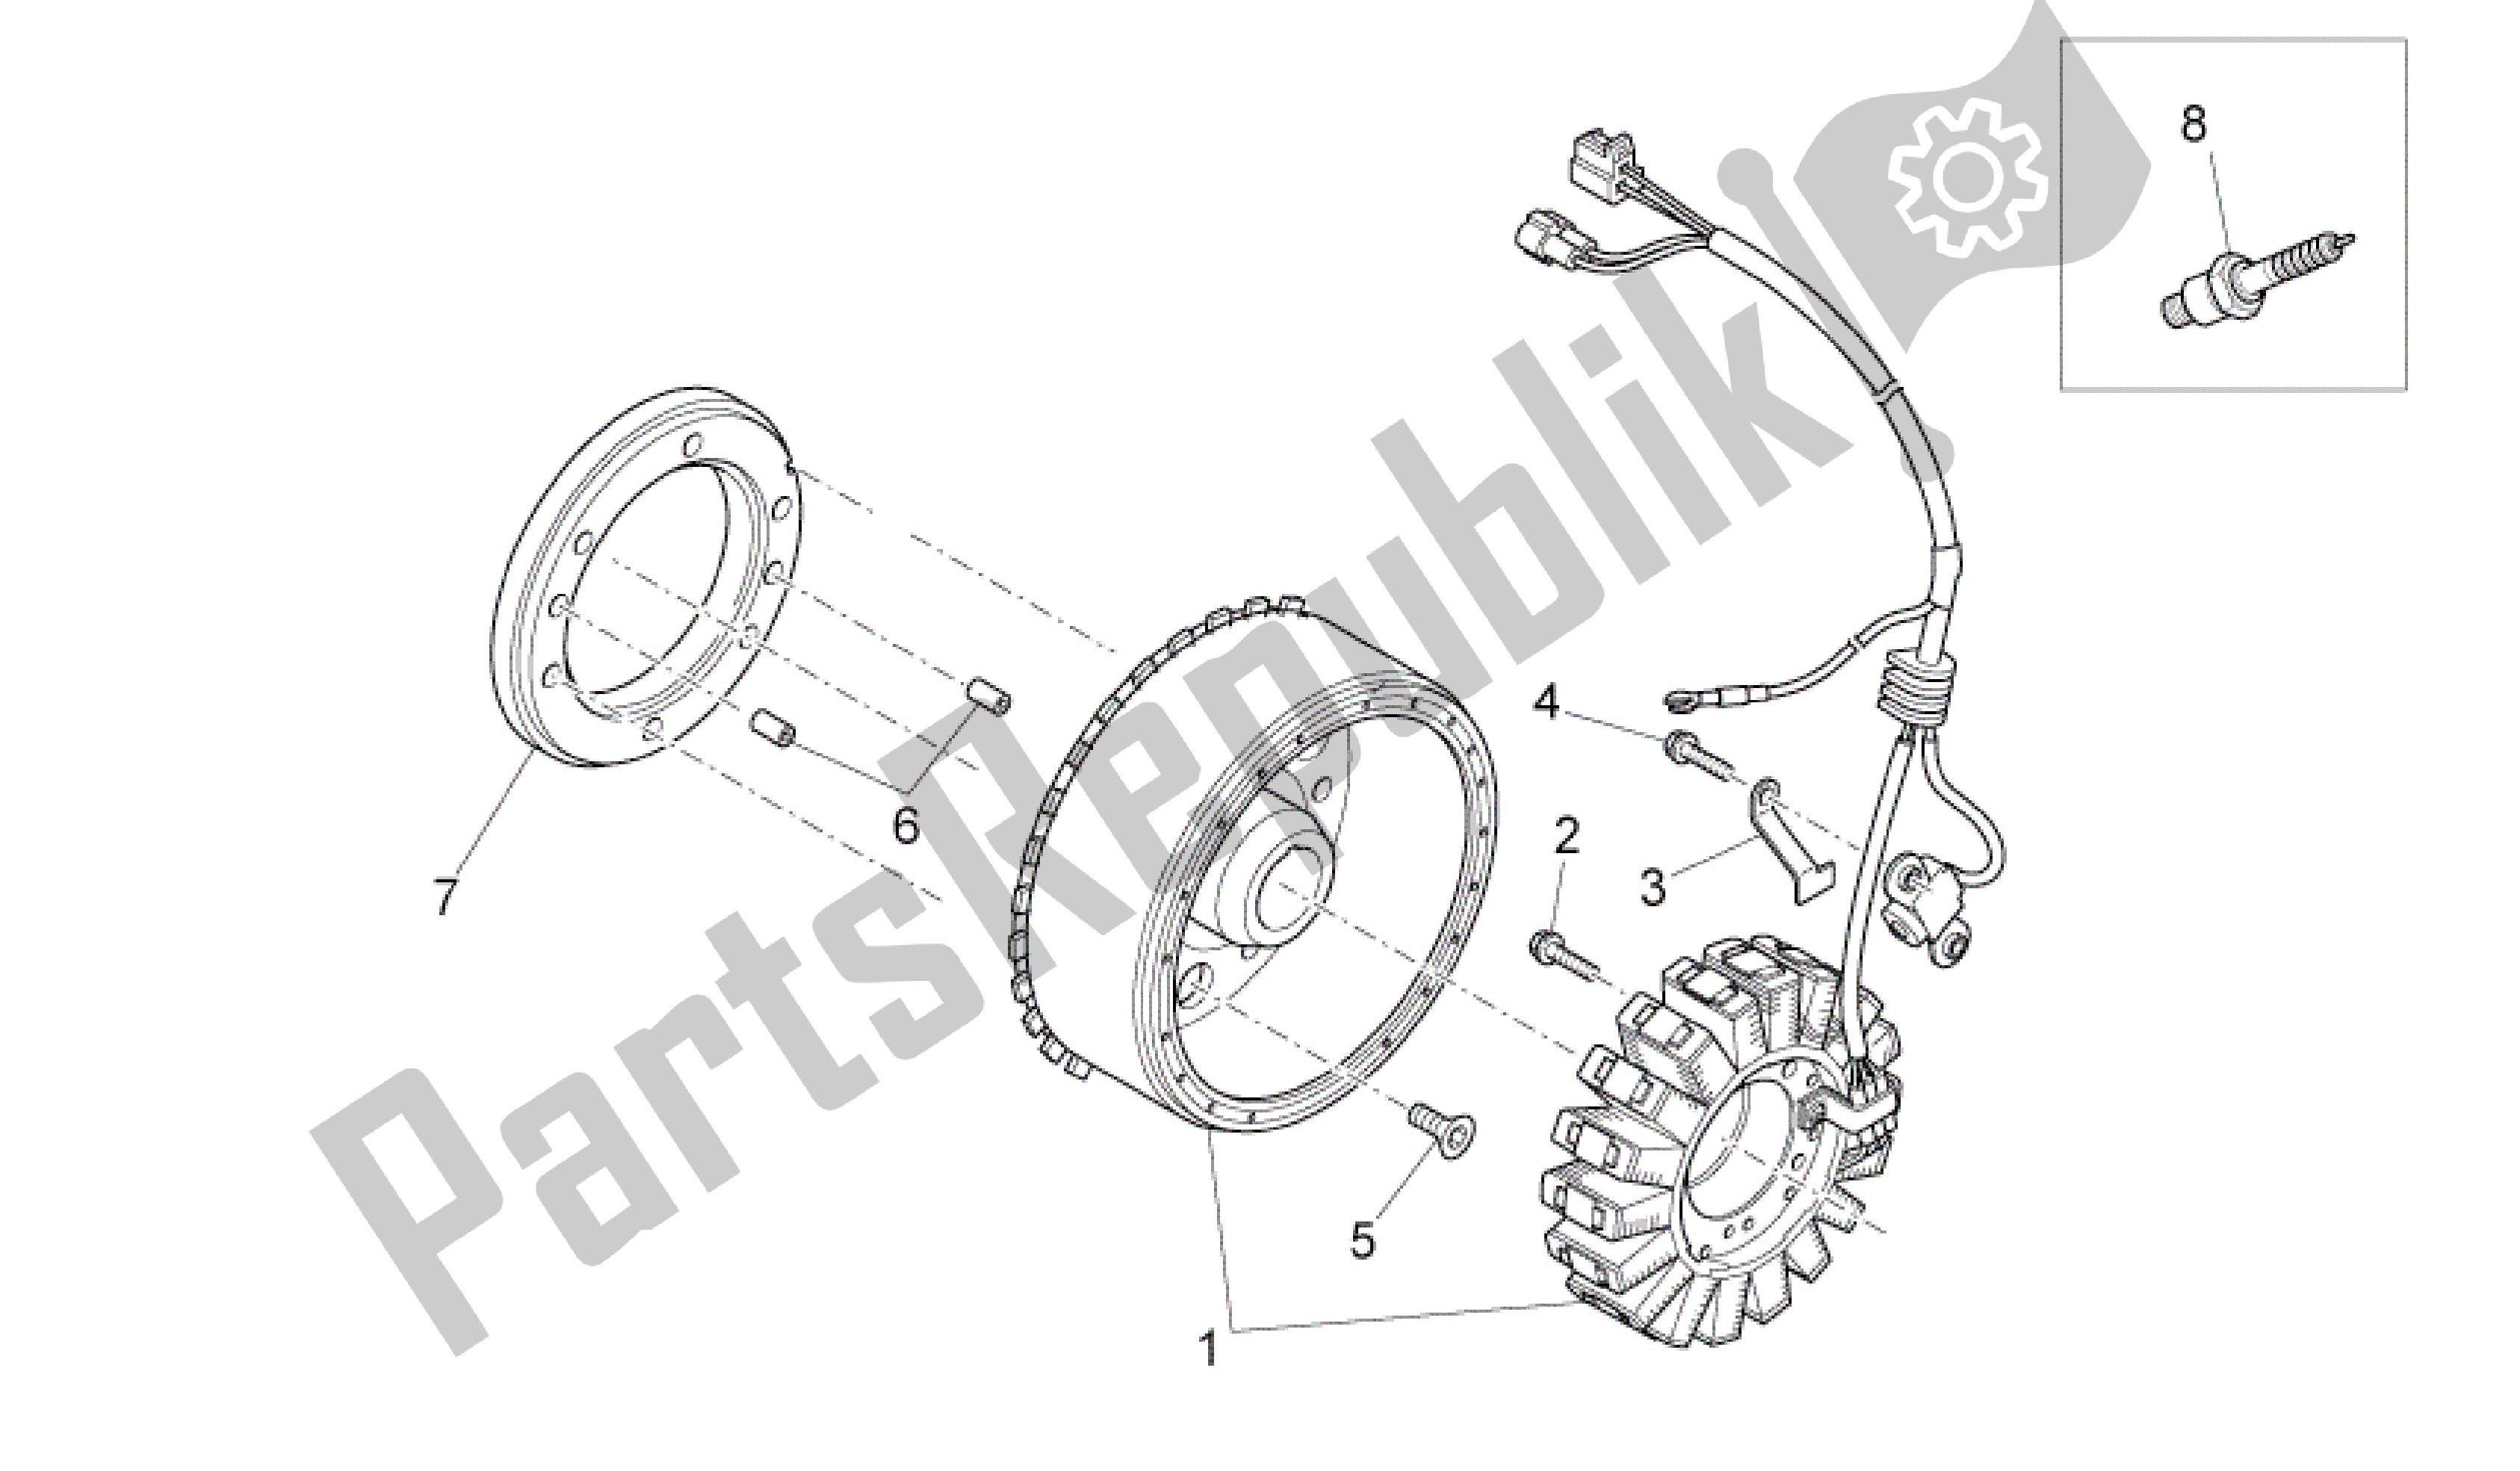 All parts for the Ignition Unit of the Aprilia MXV 450 2008 - 2010